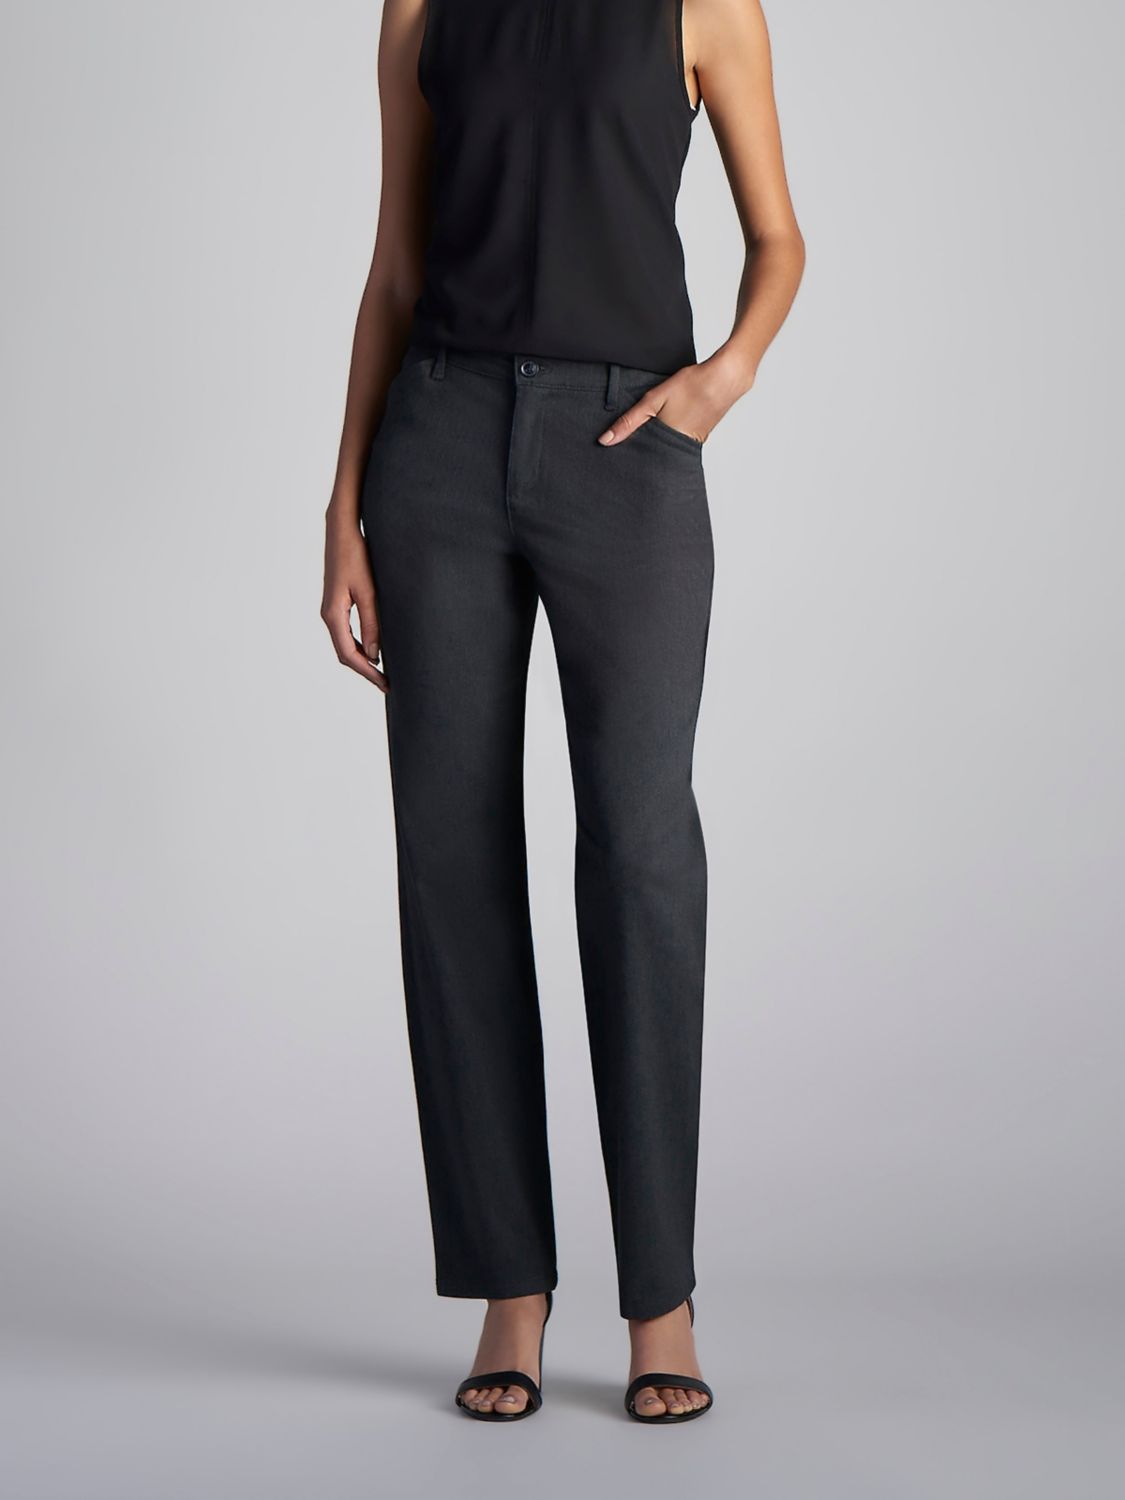 Women's Lee Relaxed Fit Straight Leg Pant All Day Work Pant